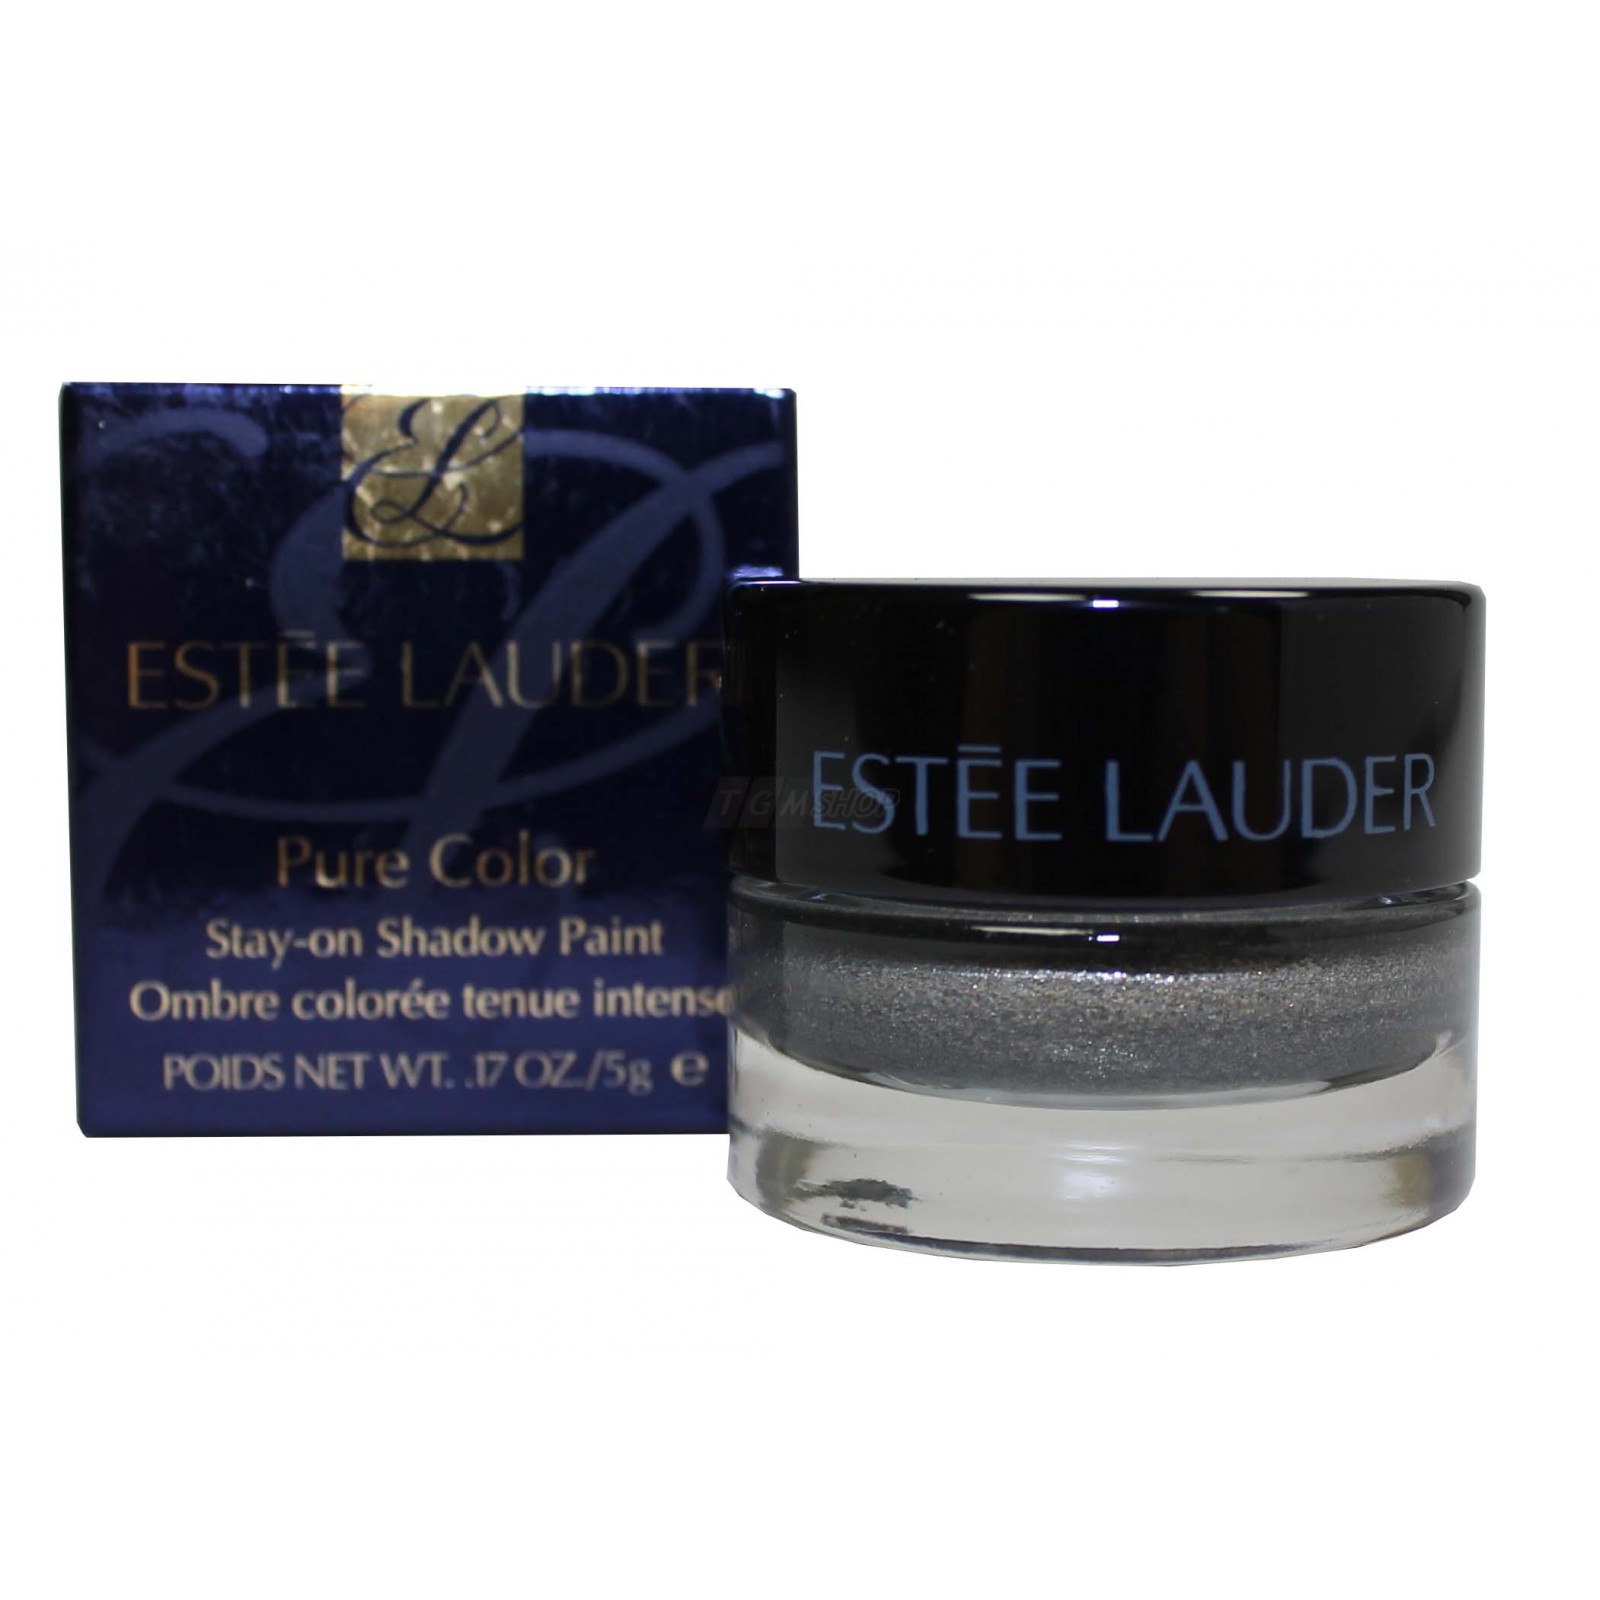 Estee Lauder - Pure Color - Stay-On Shadow Paint Creme Lidschatten - Make up  5g - 08 Steel